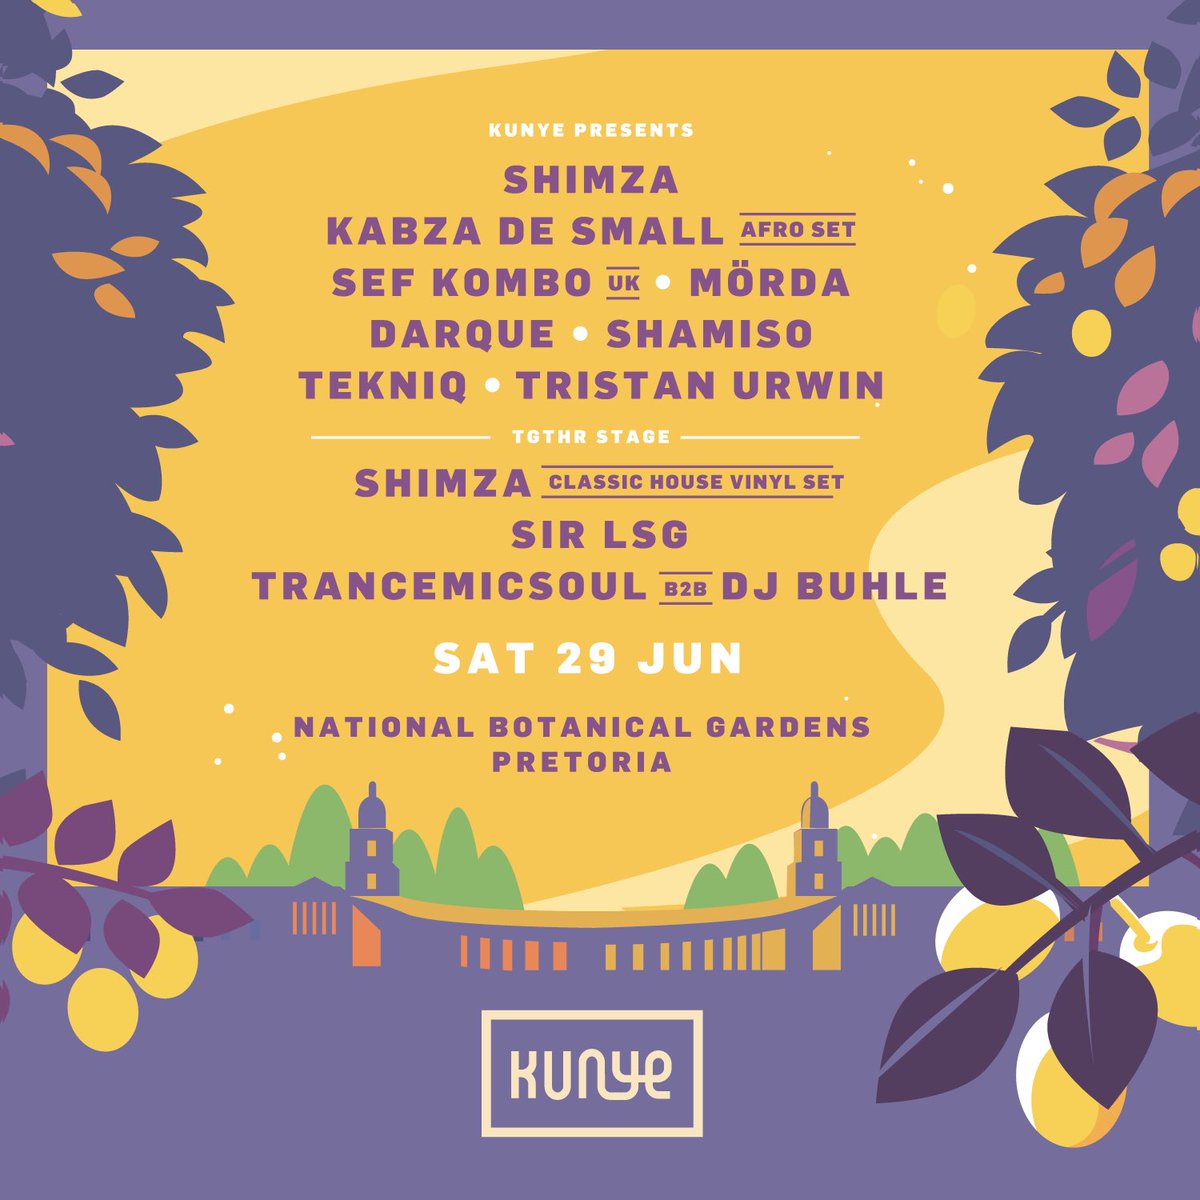 This might just be the biggest movie yet🚀 Pitori are you ready? TWO stages and some amazing additions🔥 KUNYE TGTHR, As One🖤 Make sure to get your tickets while they last🎟️ howler.co.za/events/kunye-p… #Kunye